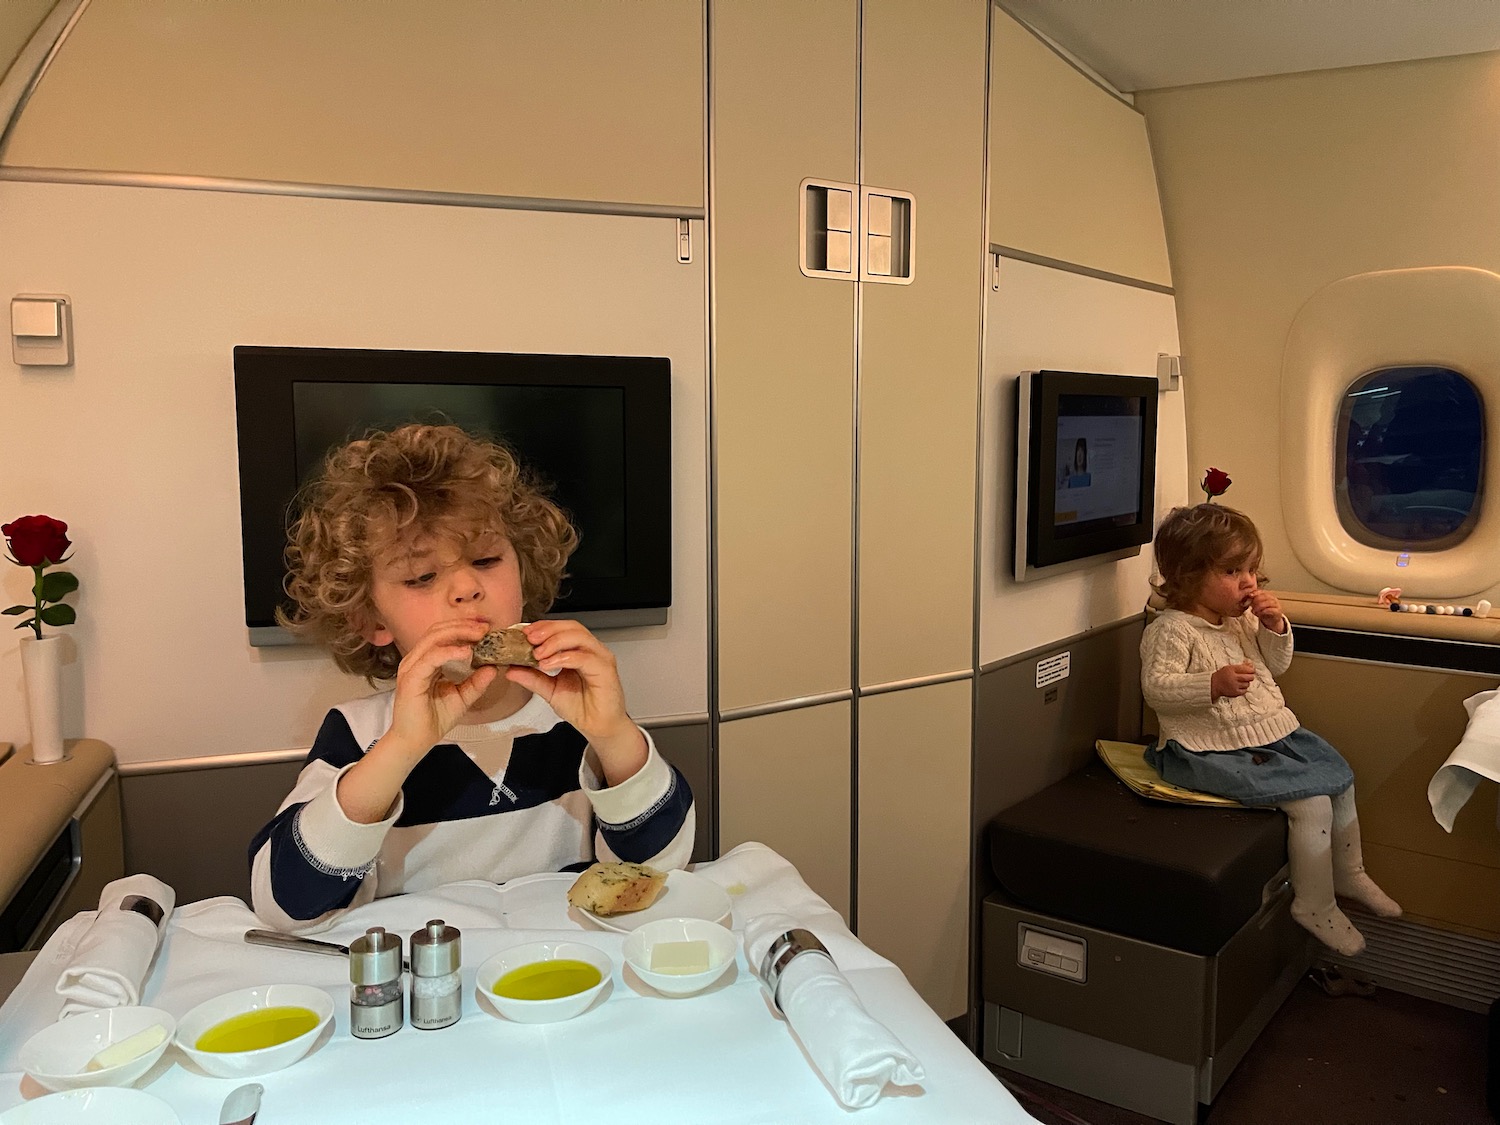 a boy eating food in a plane